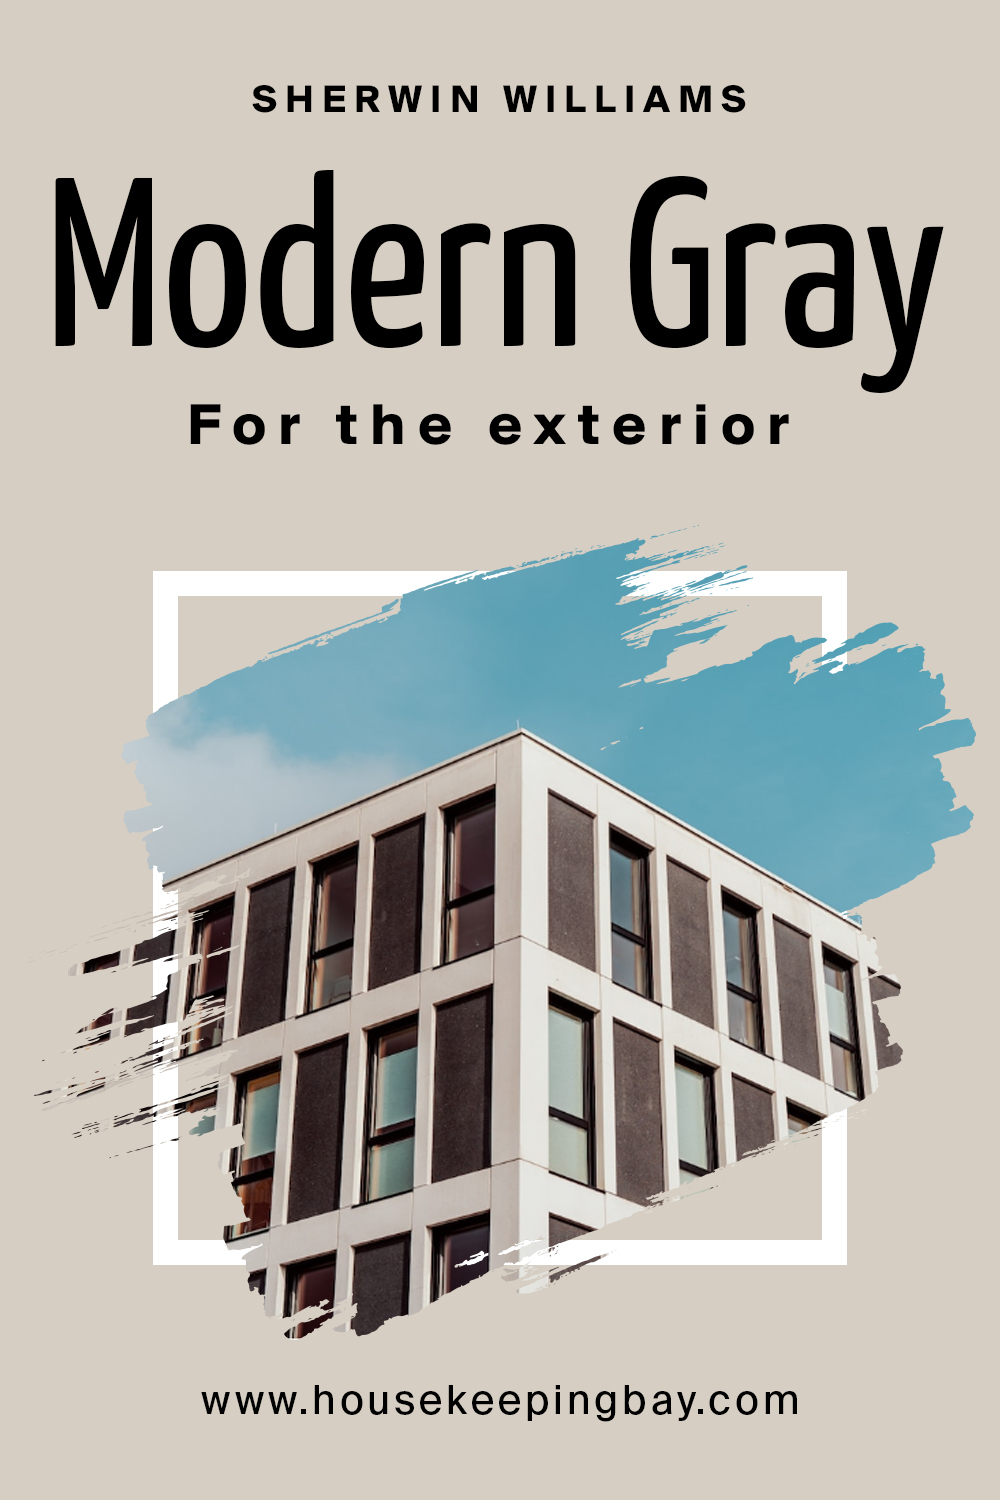 Sherwin Williams. Modern Gray For the exterior